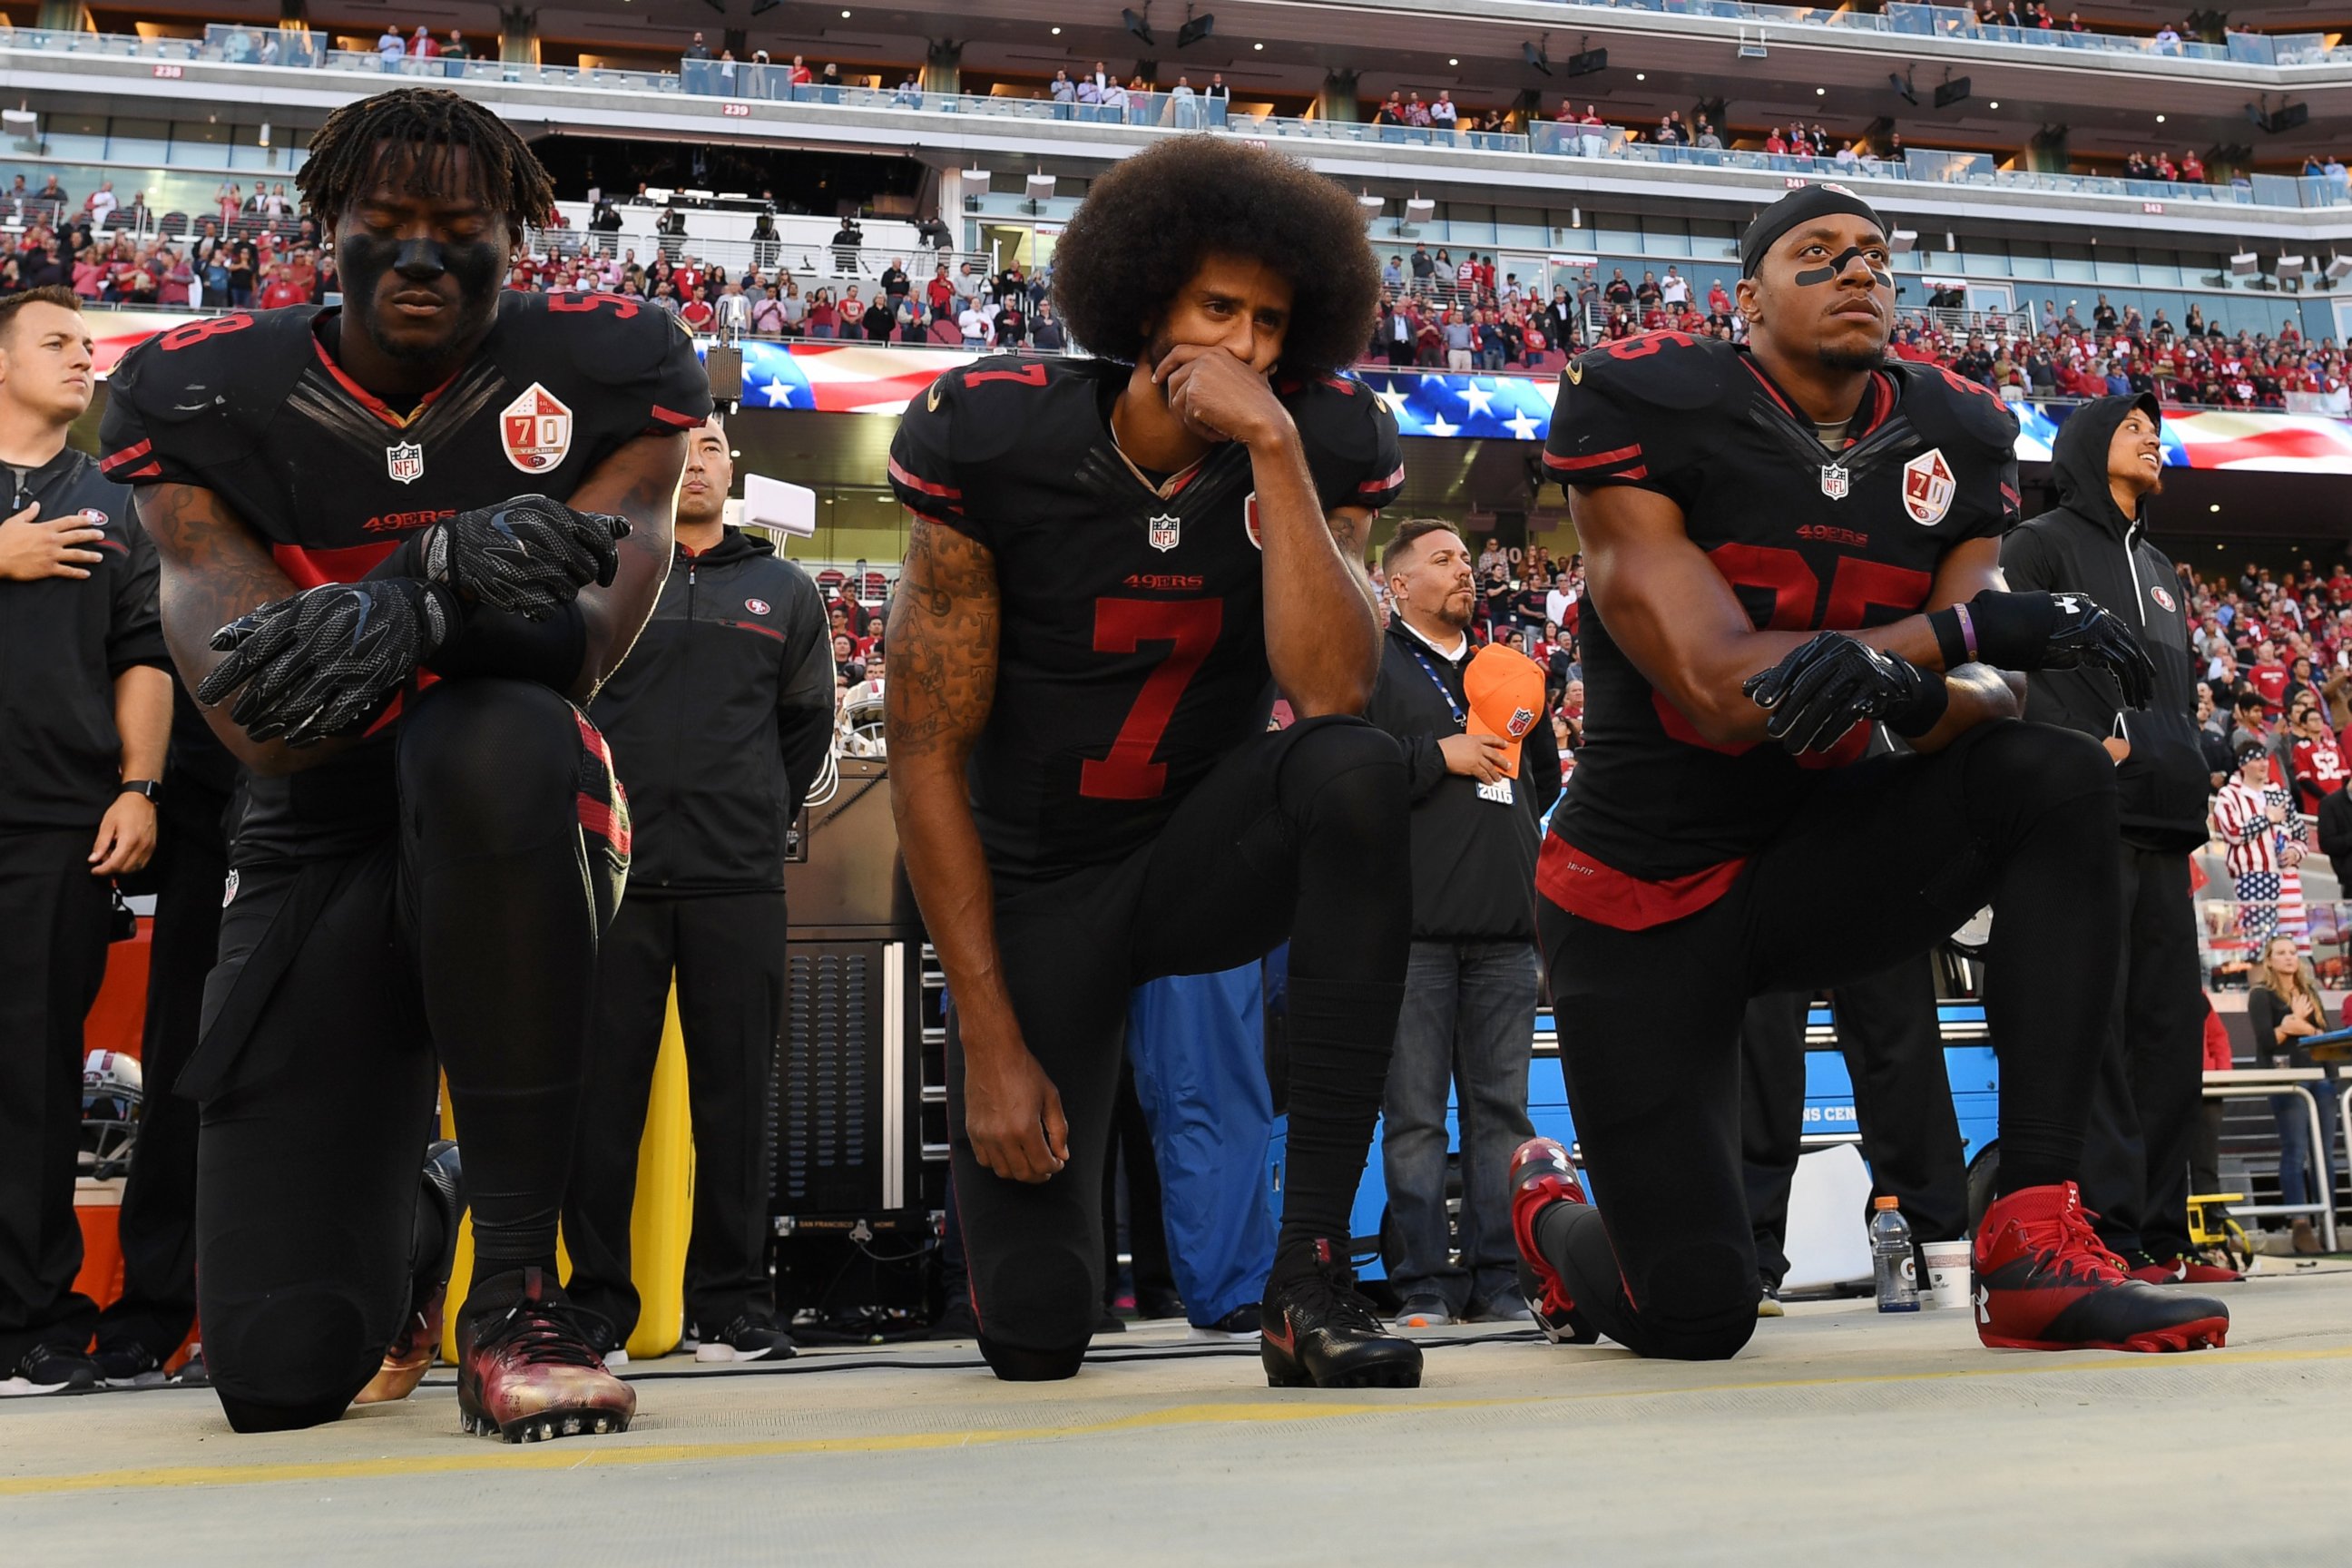 PHOTO: From left, Eli Harold, #58, Colin Kaepernick, #7, and Eric Reid, #35, of the San Francisco 49ers kneel in protest during the national anthem prior to their NFL game against the Arizona Cardinals, Oct. 6, 2016, in Santa Clara, California.